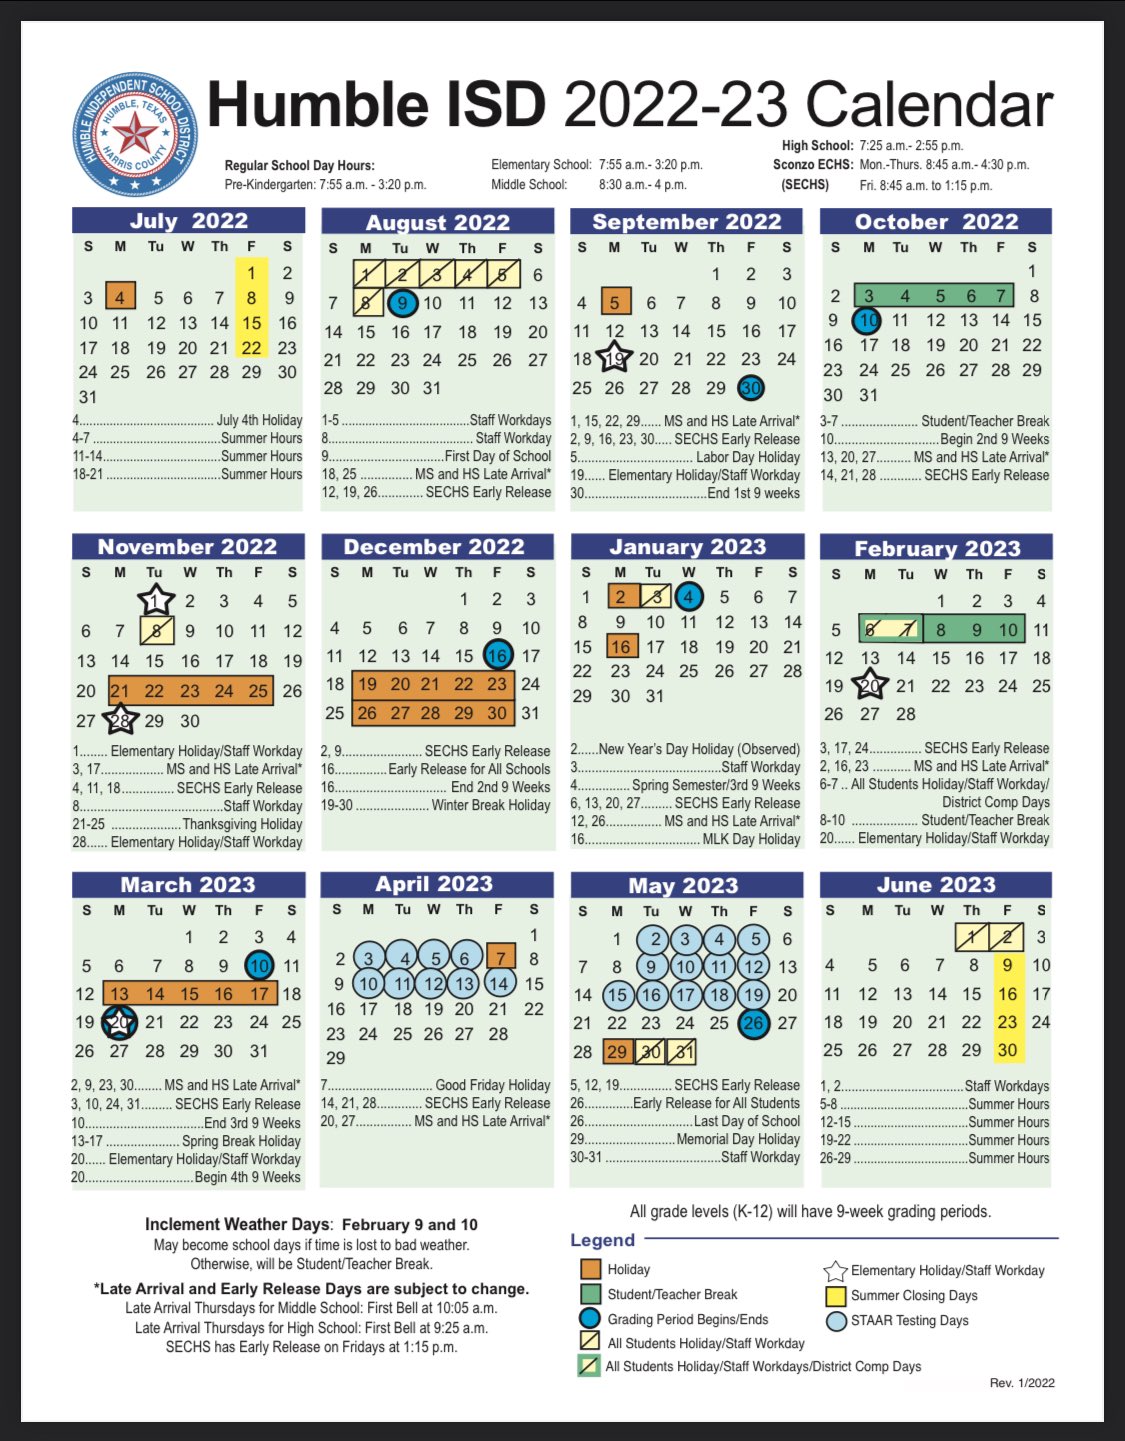 Cms 2022 And 2023 Calendar Humble Isd Parents On Twitter: "2022-2023 Calendar Is Out.  Https://T.co/Wmjonrkdys Https://T.co/St2Qbpgmsy" / Twitter